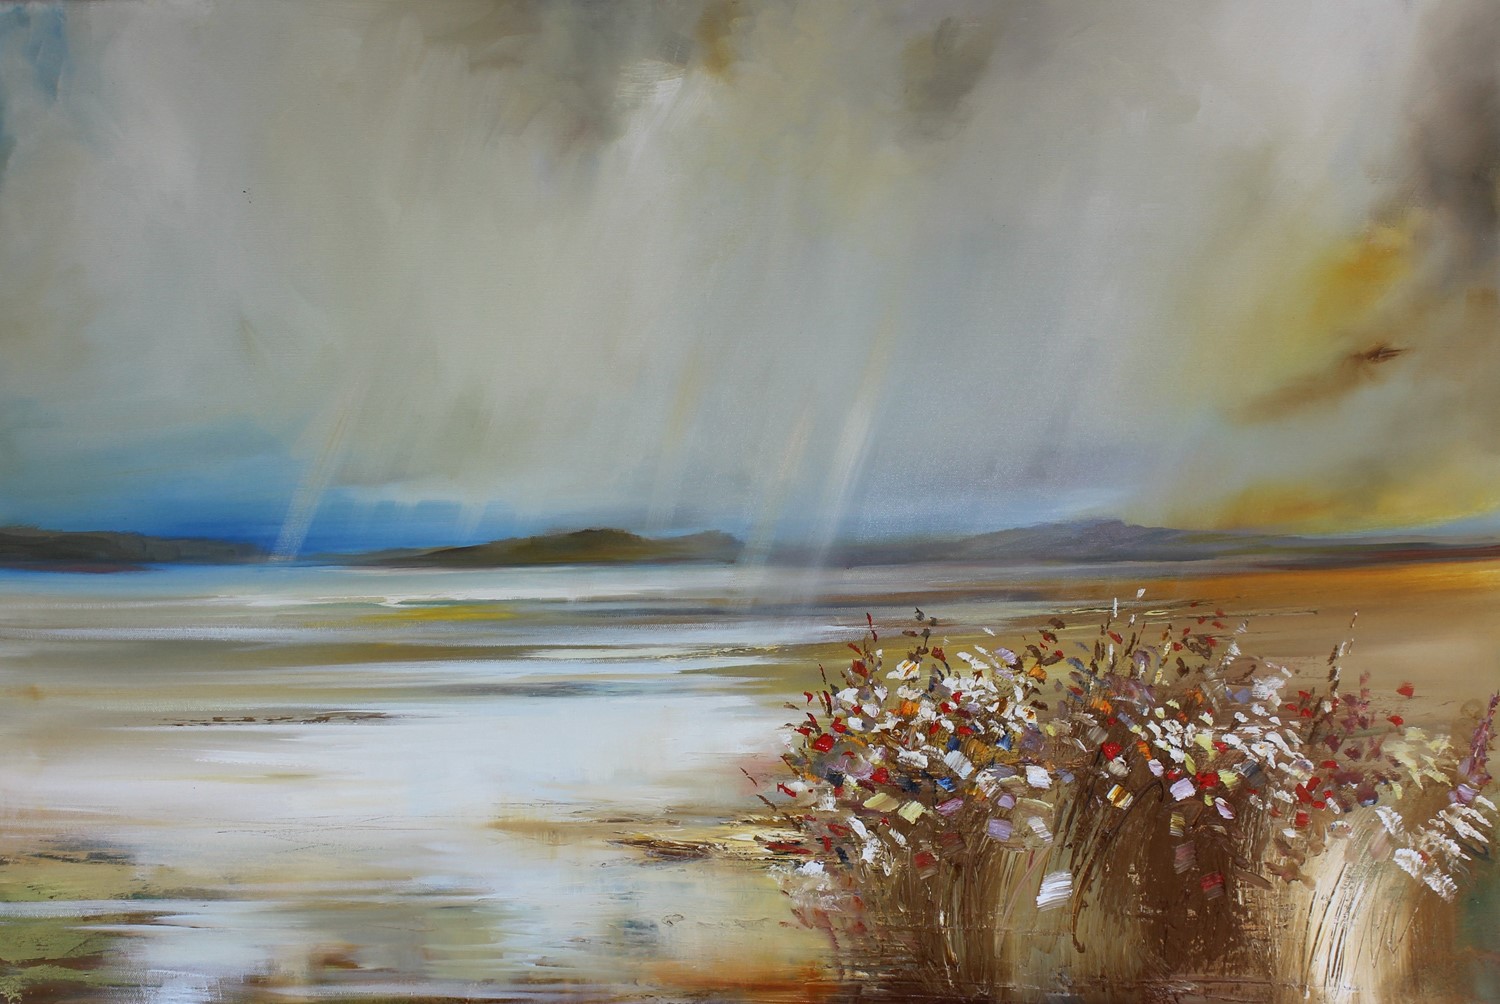 'The Scottish Weather' by artist Rosanne Barr